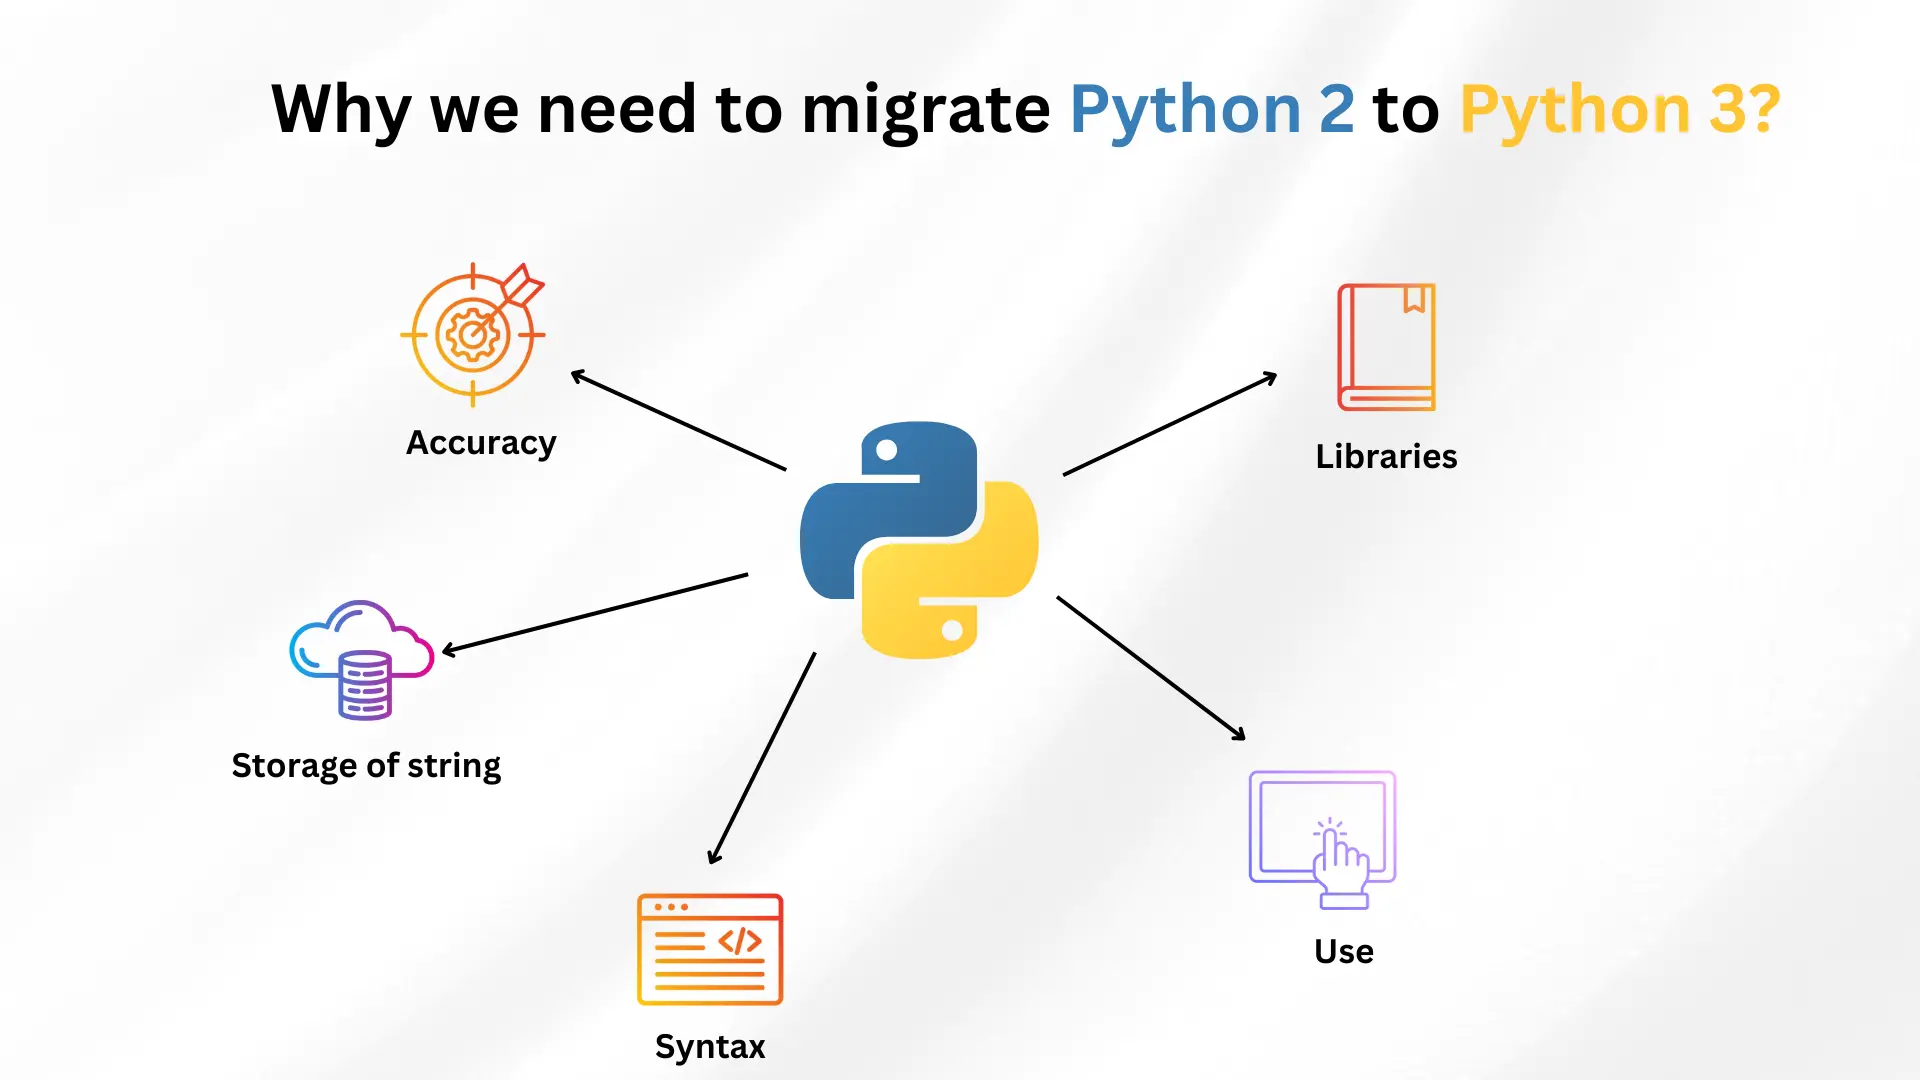 Why we need to migrate from Python 2 to Python 3